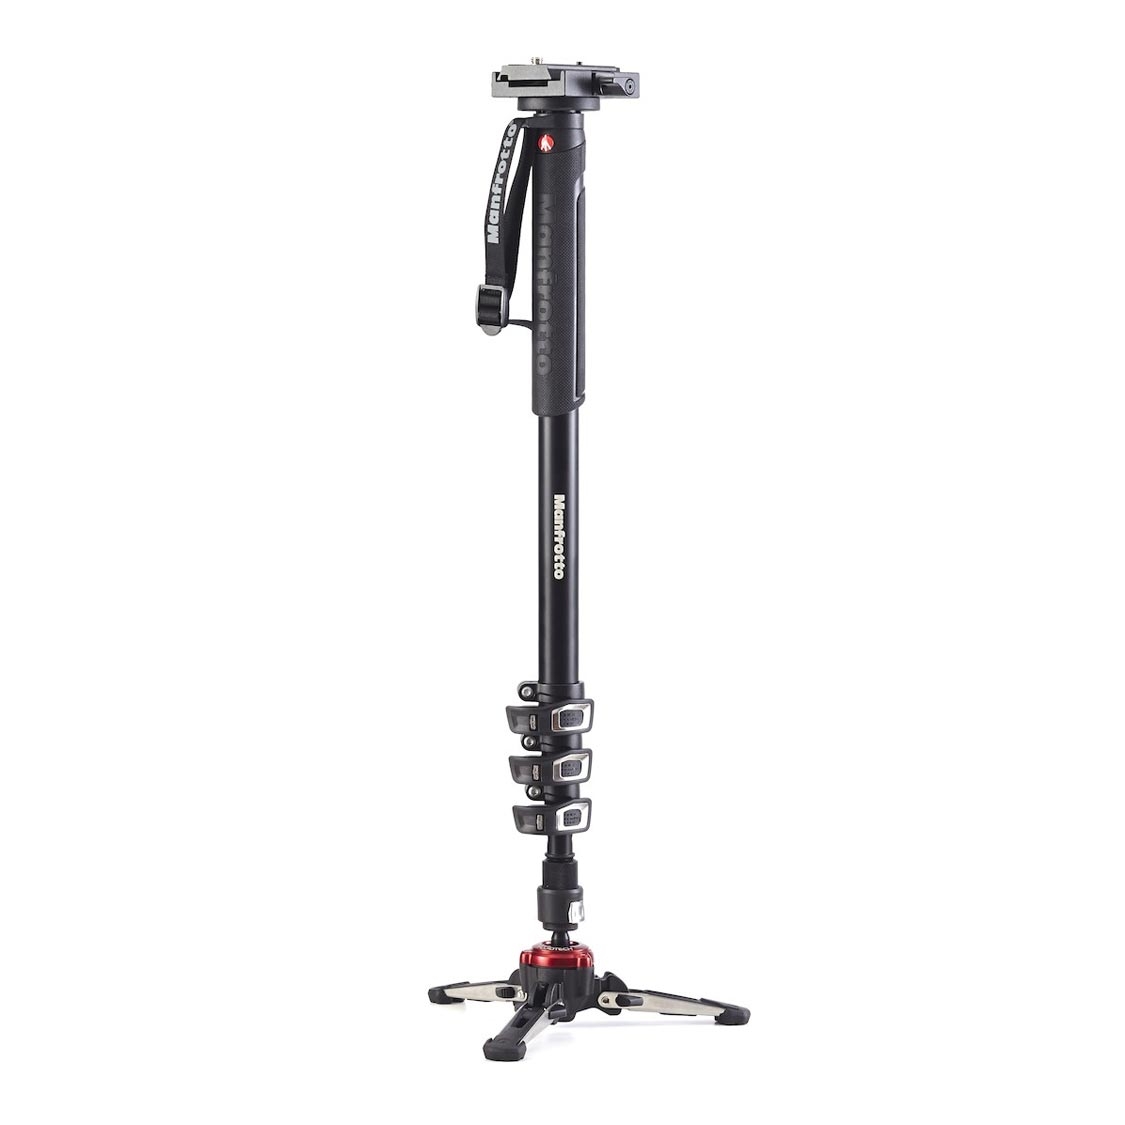 Manfrotto XPRO Video Monopod with 577 Video Adapter